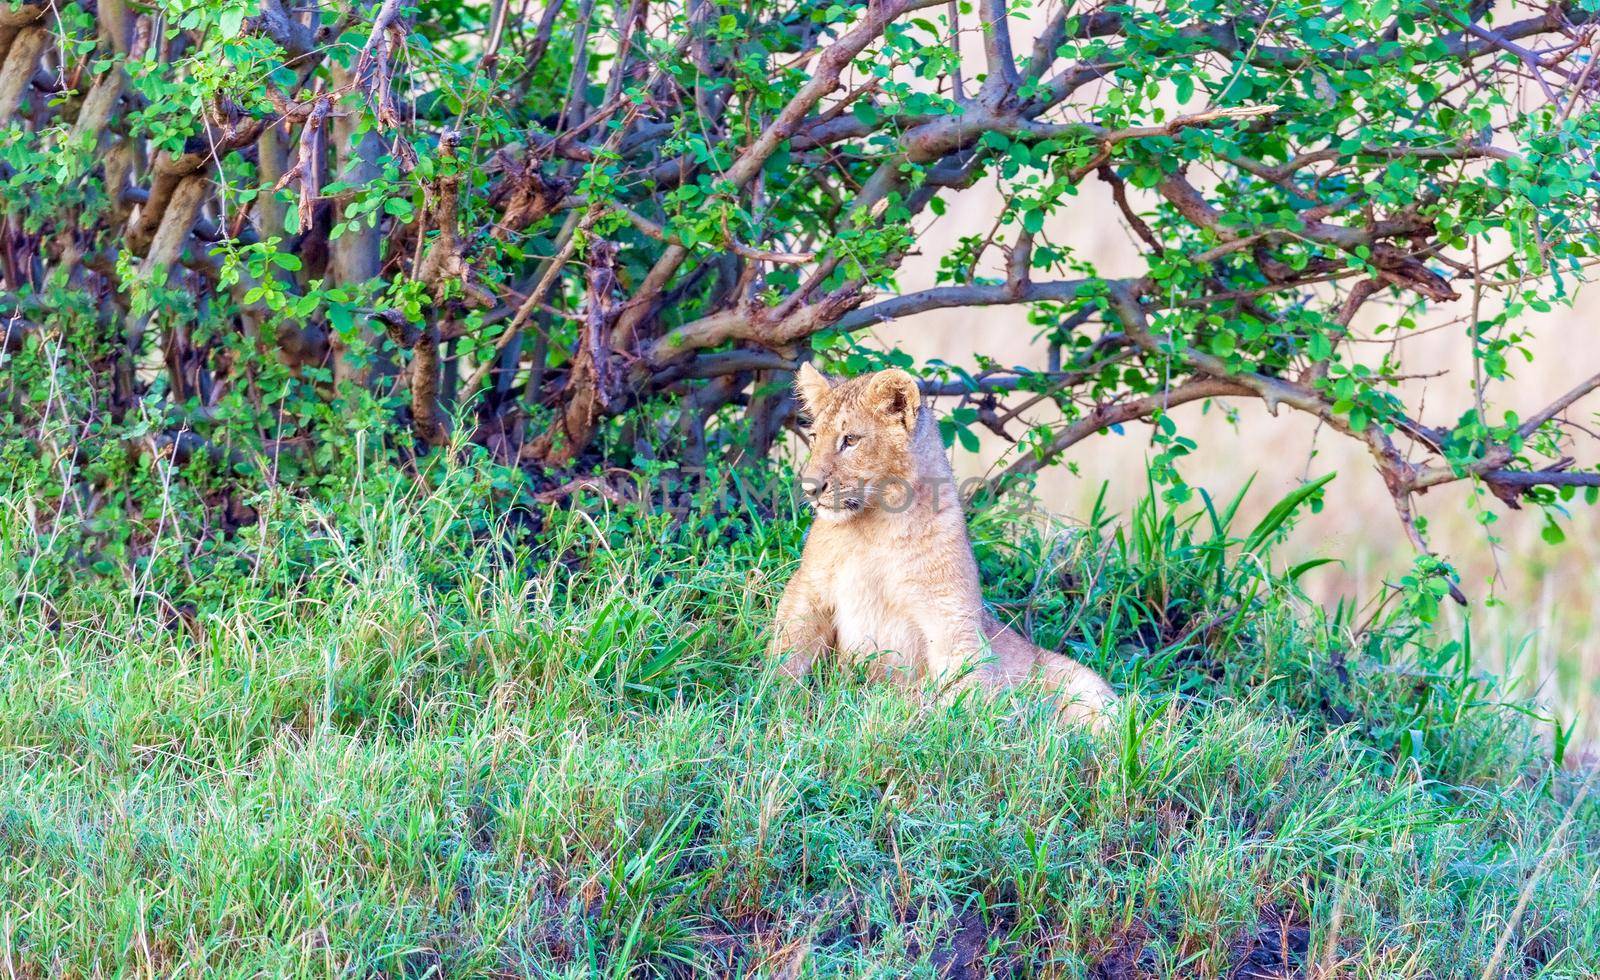 The young lion hid in the thick grass. Kenya, a national park. Wildlife concept, Safari photo.